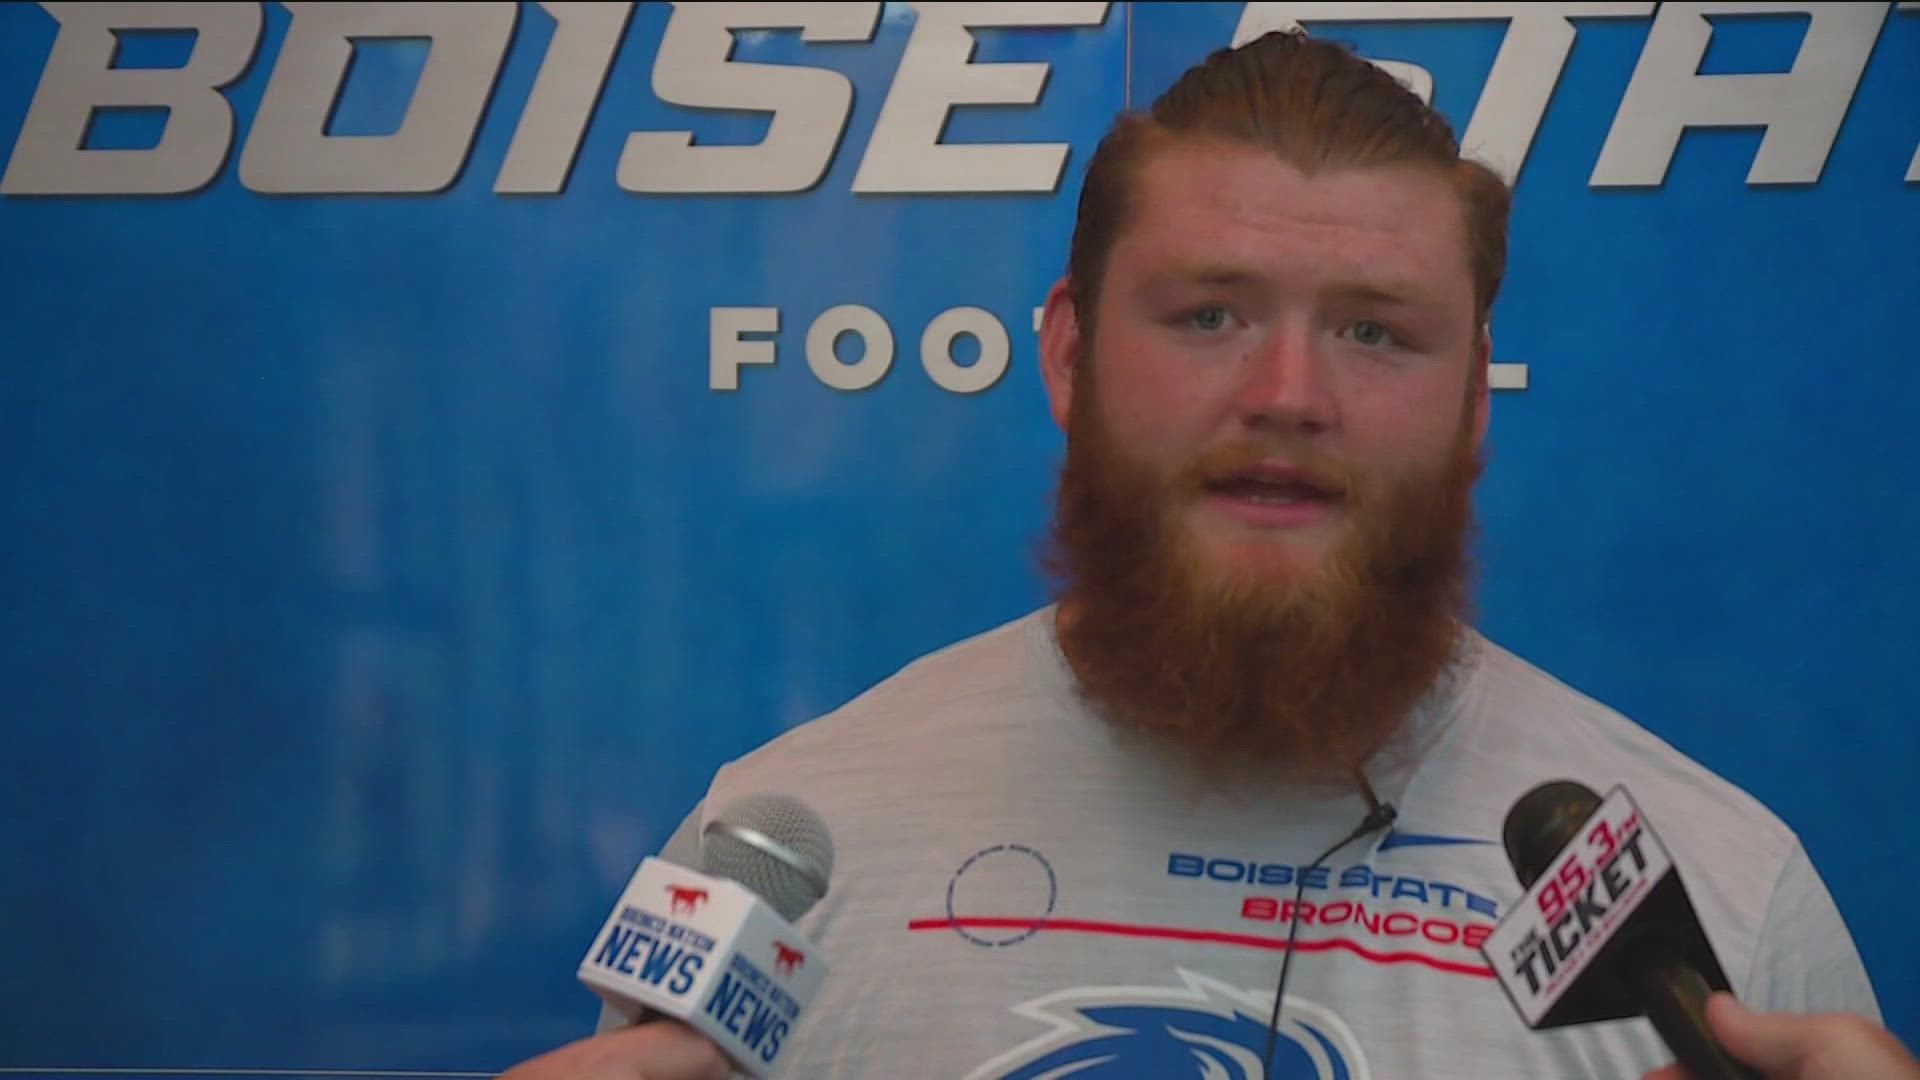 Beresford transferred from Washington State to Boise State this spring. All-Mountain West second teamer Ben Dooley said Beresford's presence is boosting the o-line.